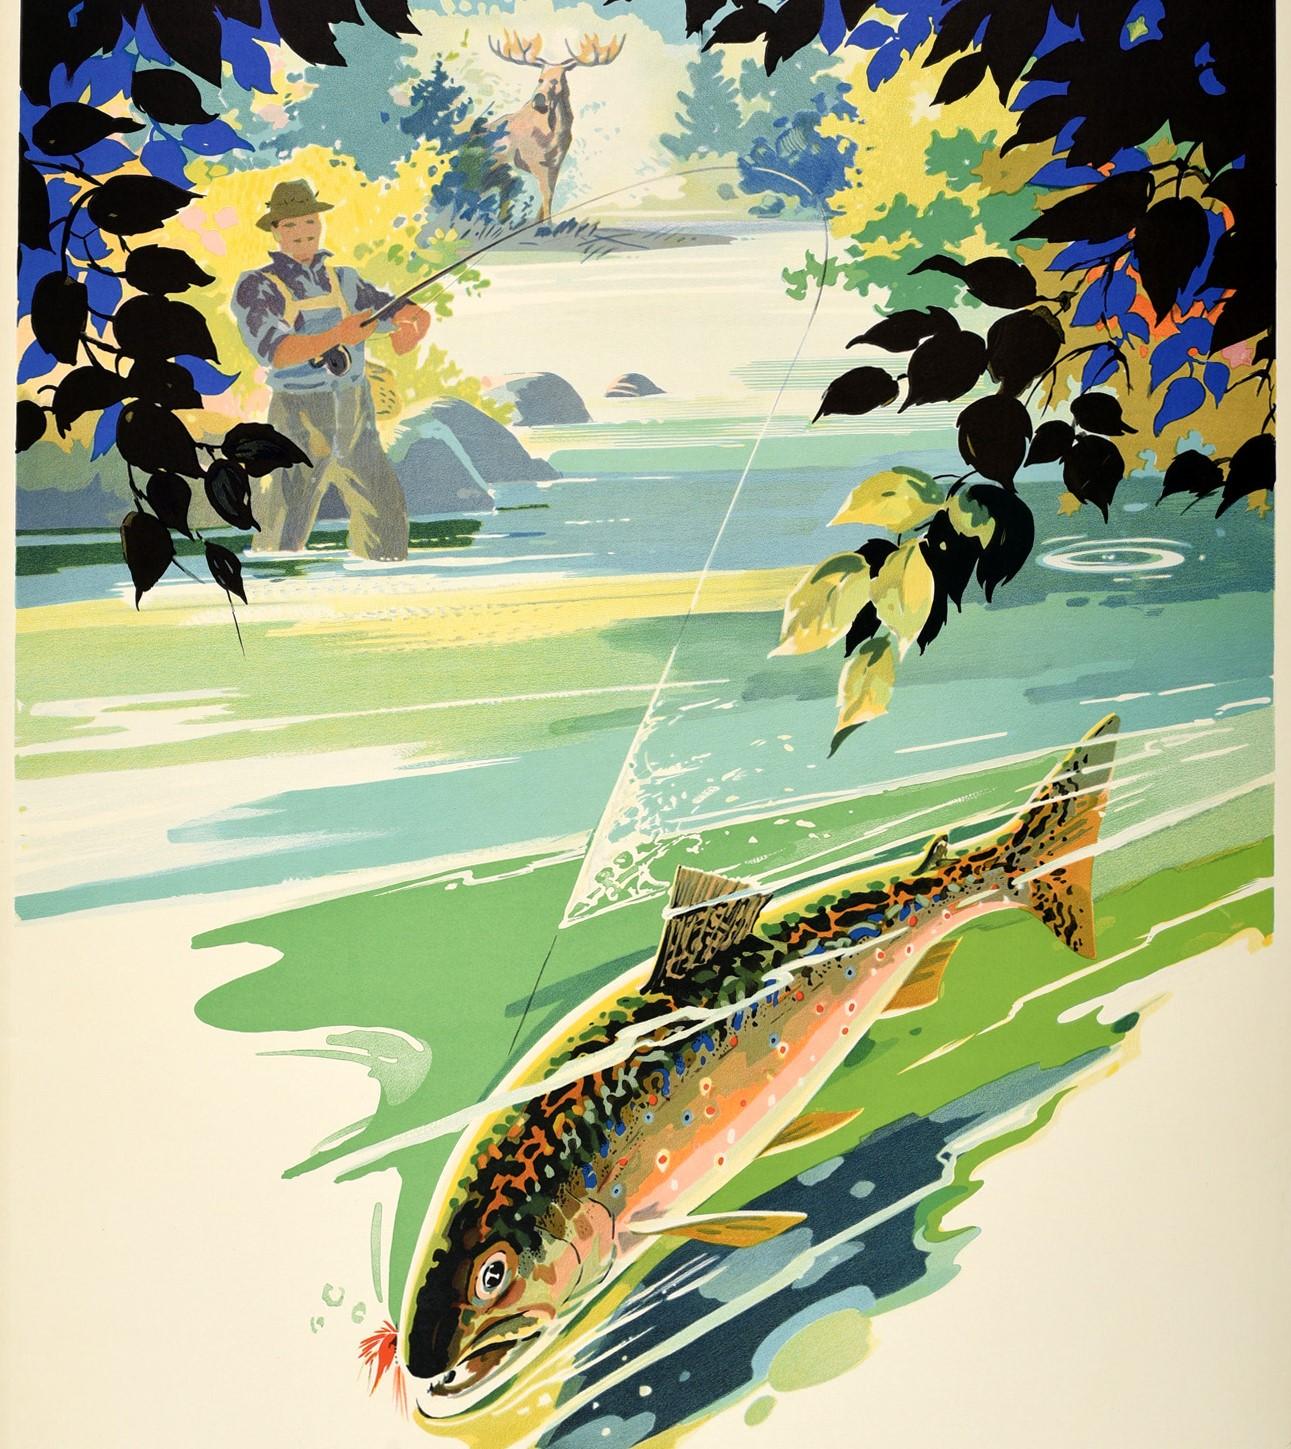 Original vintage travel advertising poster for La Province de Quebec or the Province of Quebec in Canada featuring a great design depicting a fisherman in a river fly fishing for trout caught in the foreground with a moose visible in the background